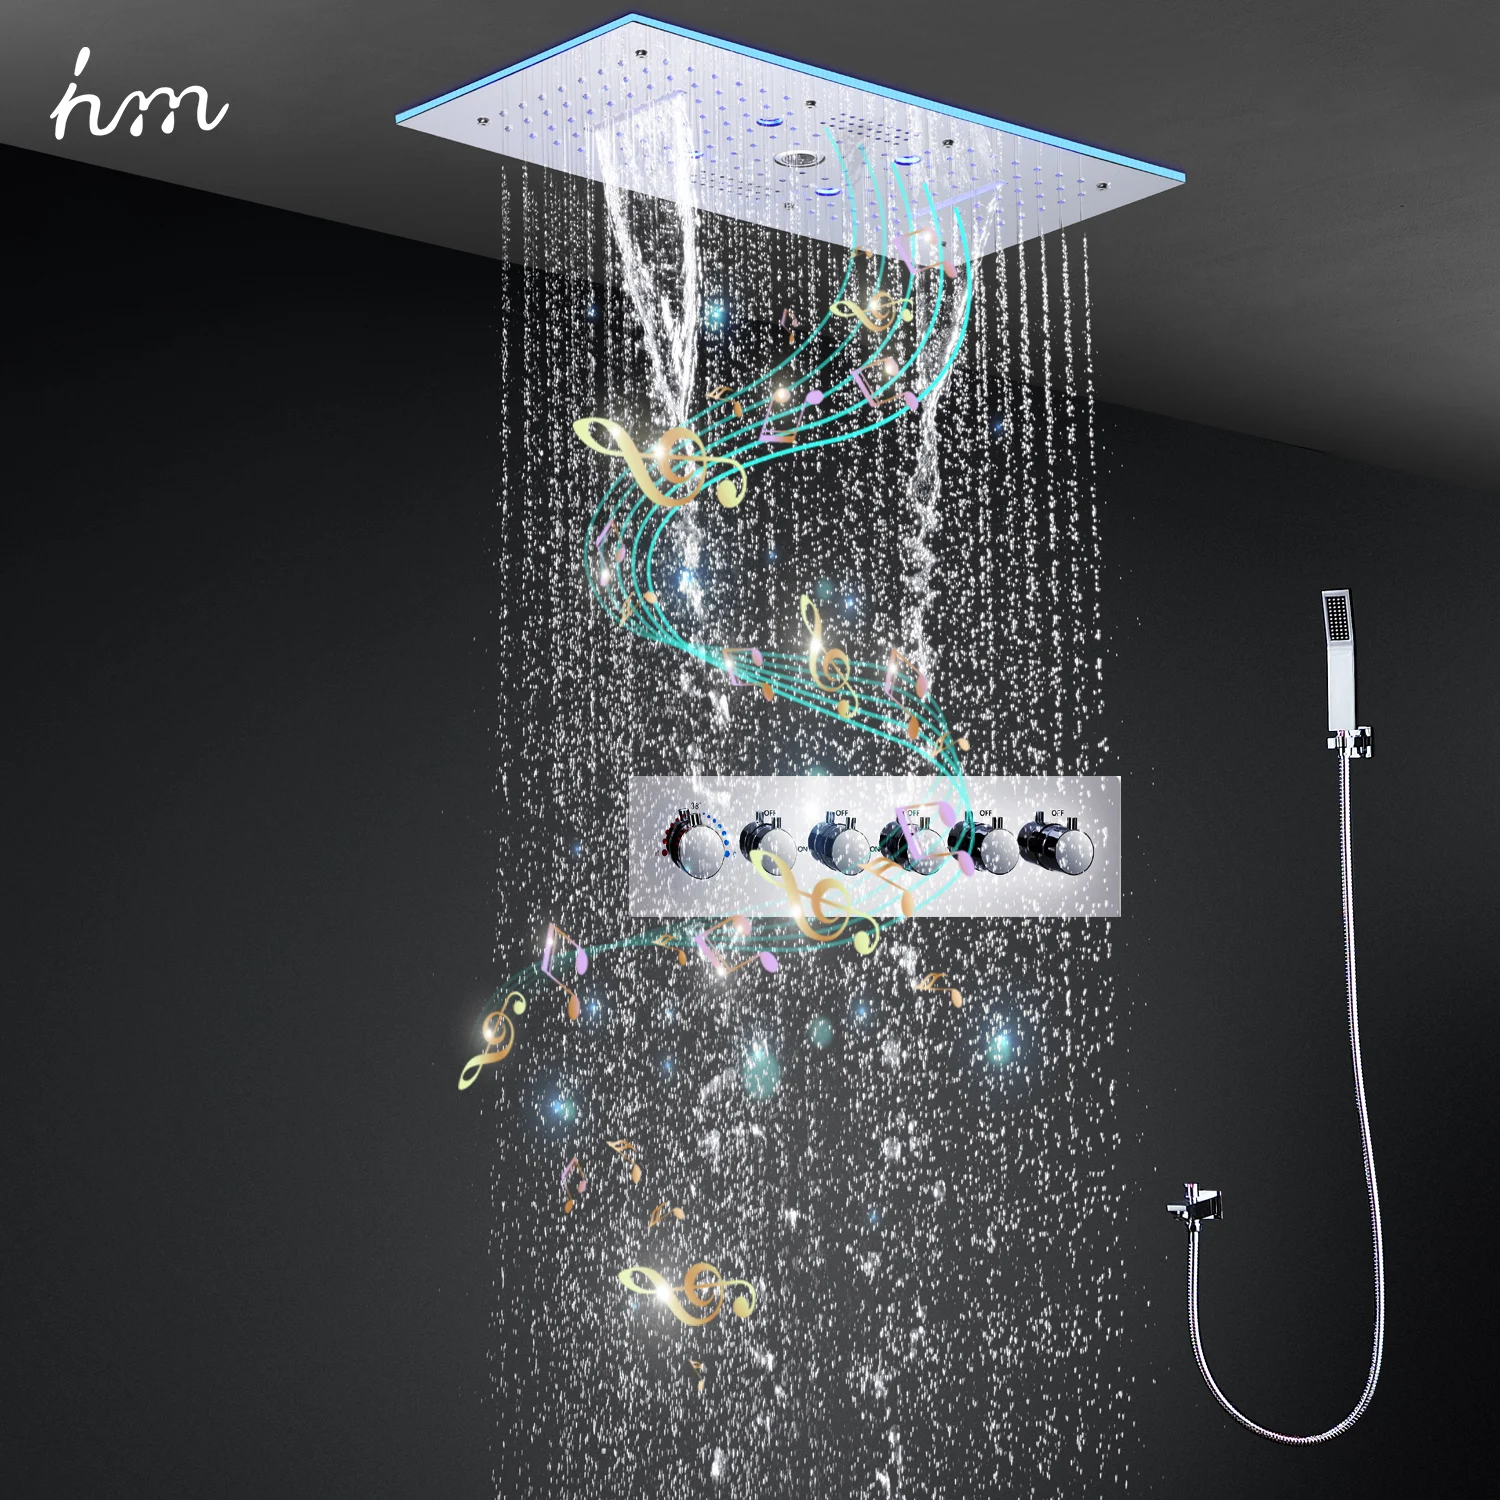 hm 6 Functions Music Shower System Ceiling LED Shower Head Panel Rainfall Misty Waterfall Thermostatic Shower Mixer Diverter Set